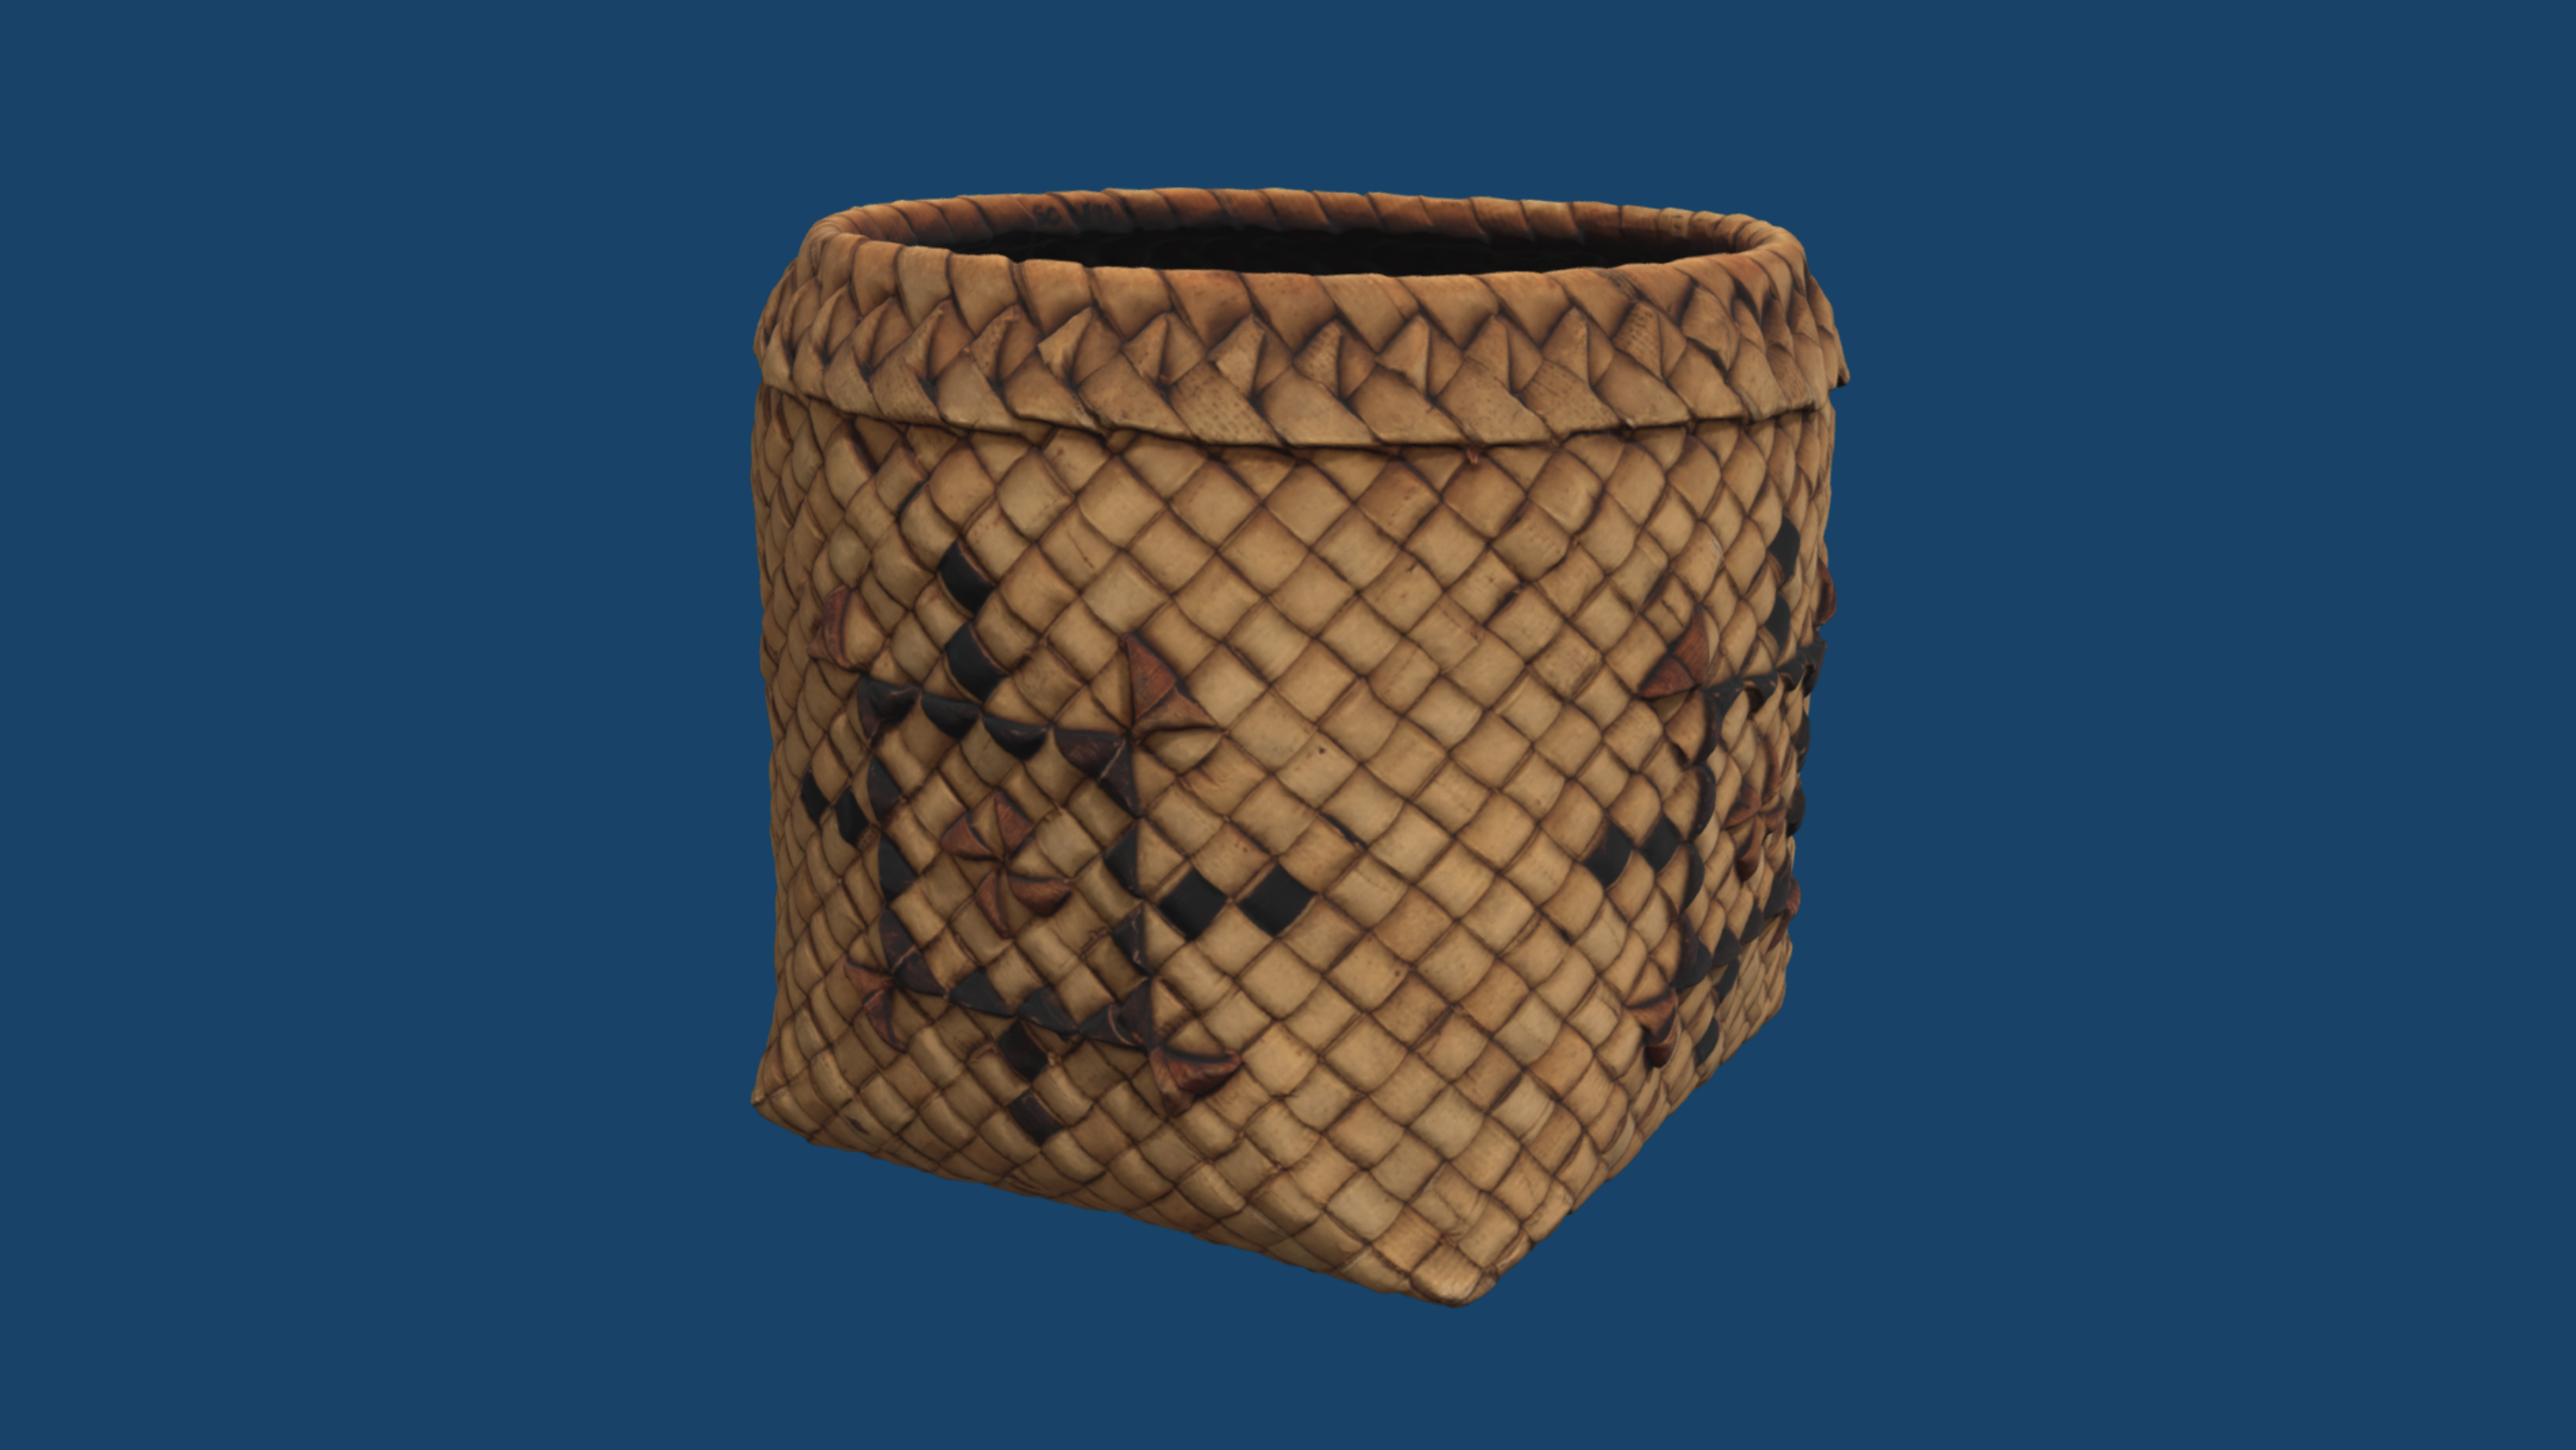 Woven bait basket from IUMAA Teaching Collection